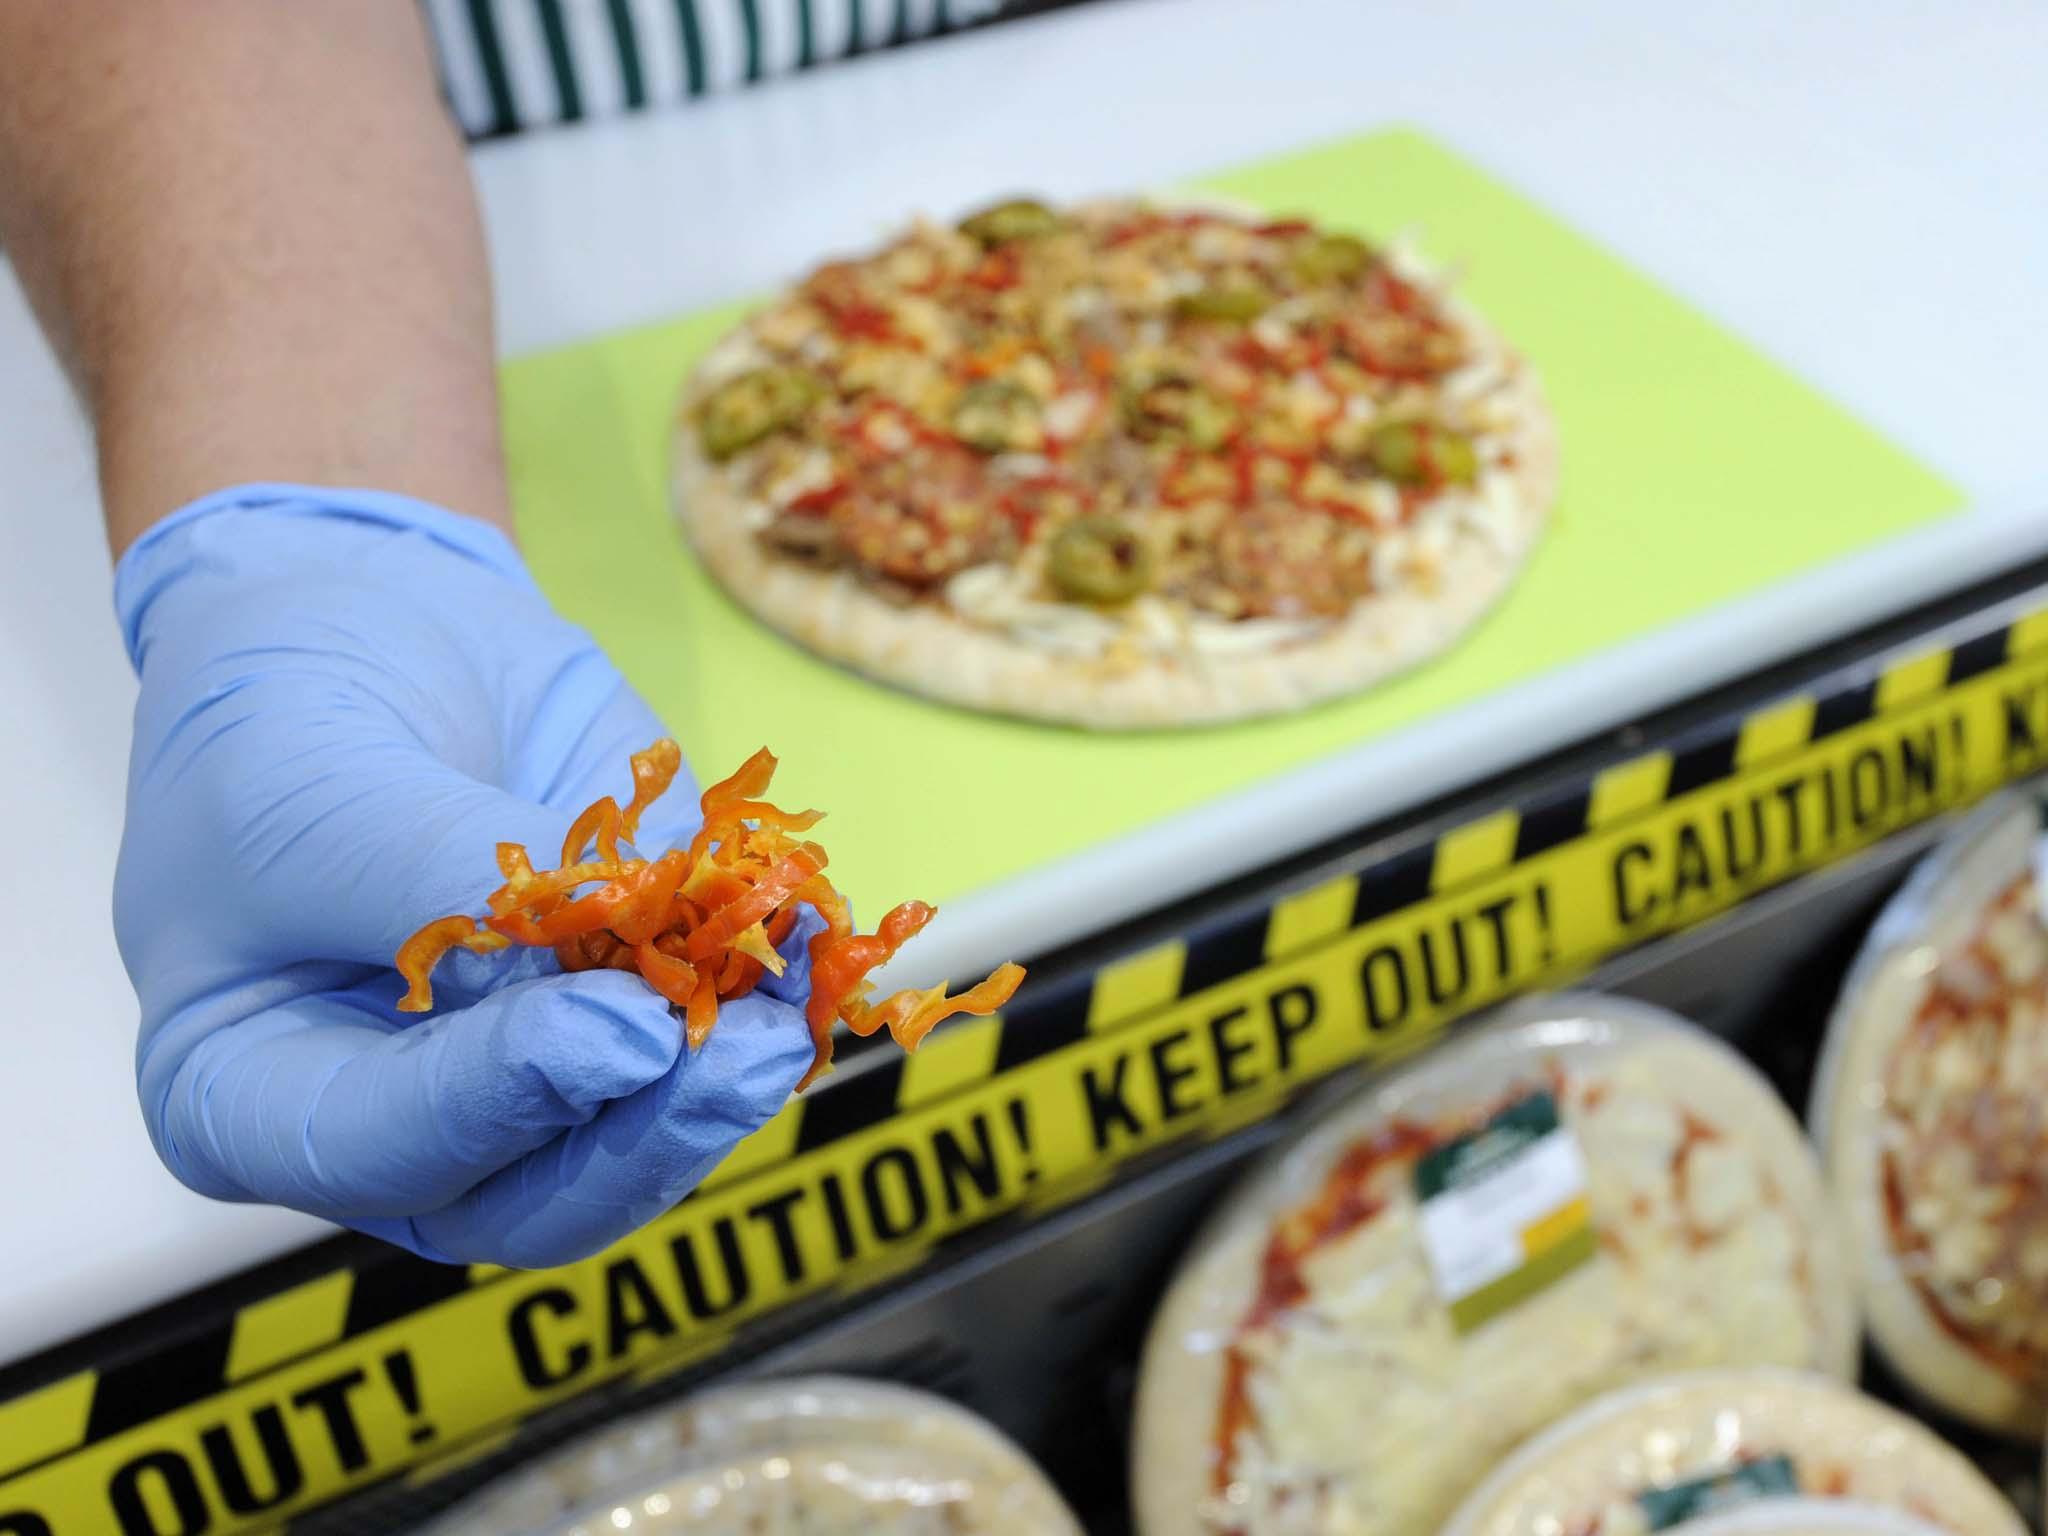 The 'hottest ever pizza', introduced for Halloween, saw strong sales